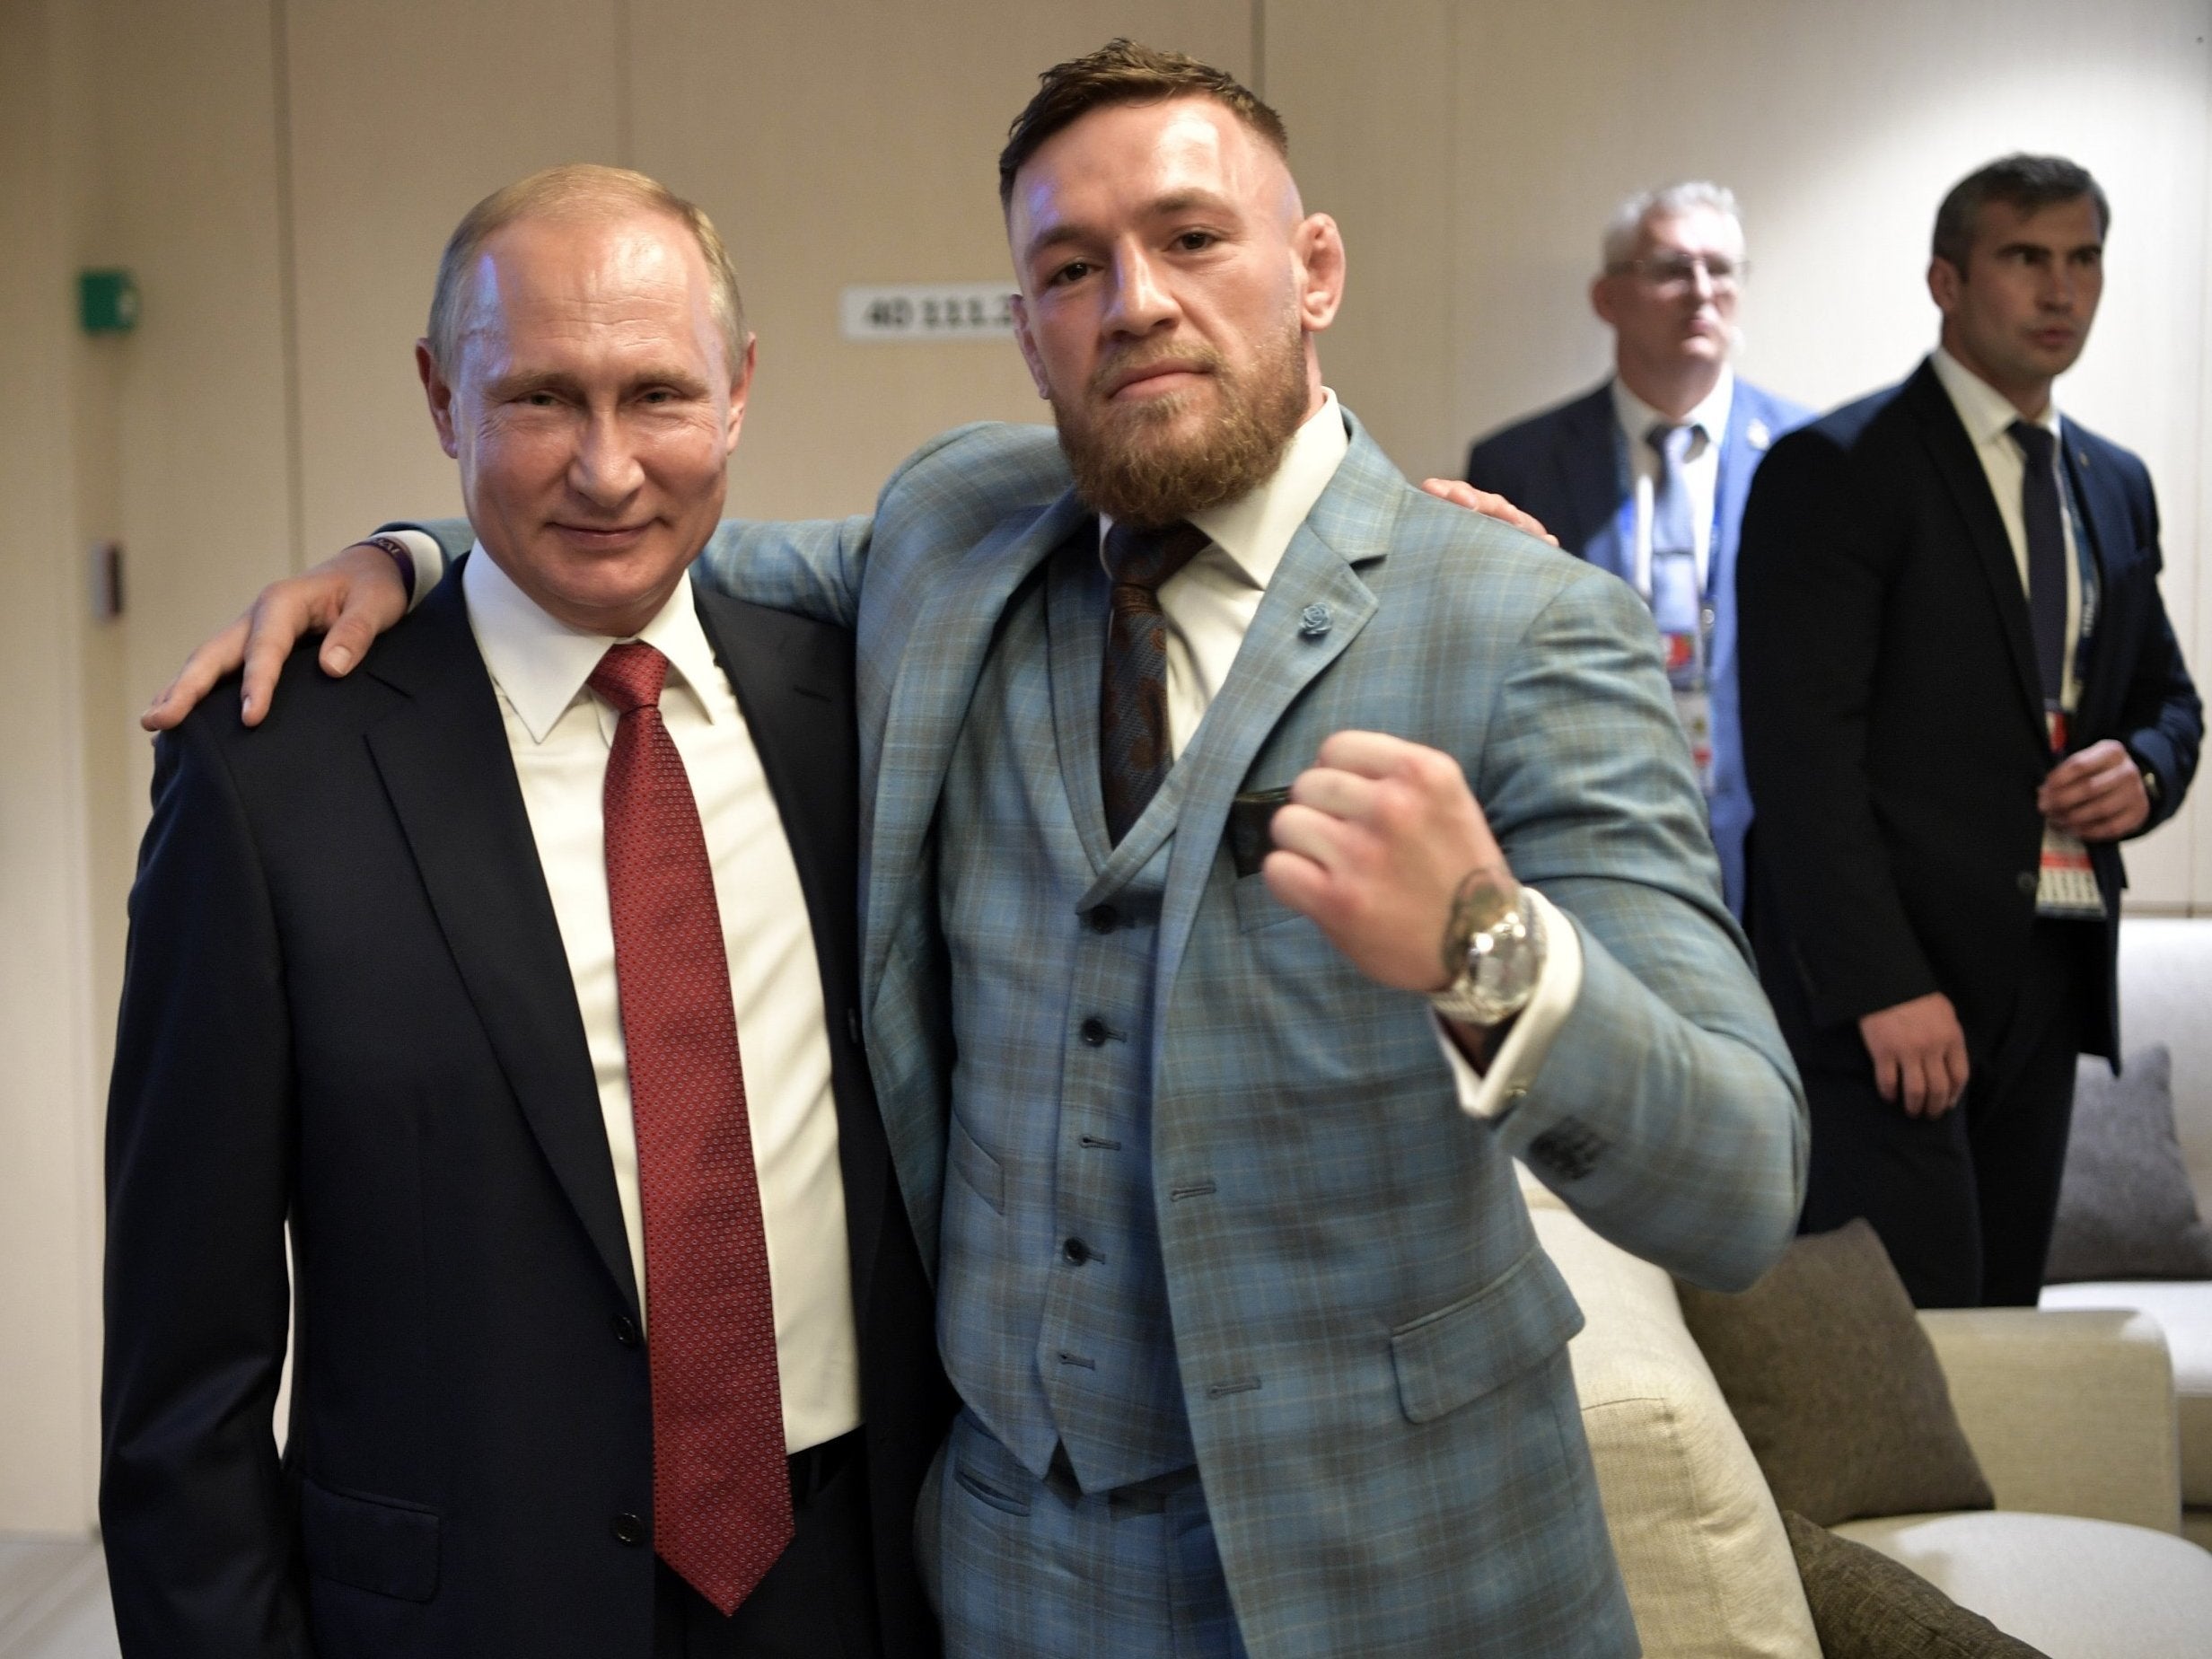 Russia president Vladimir Putin poses for a picture with UFC star Conor McGregor